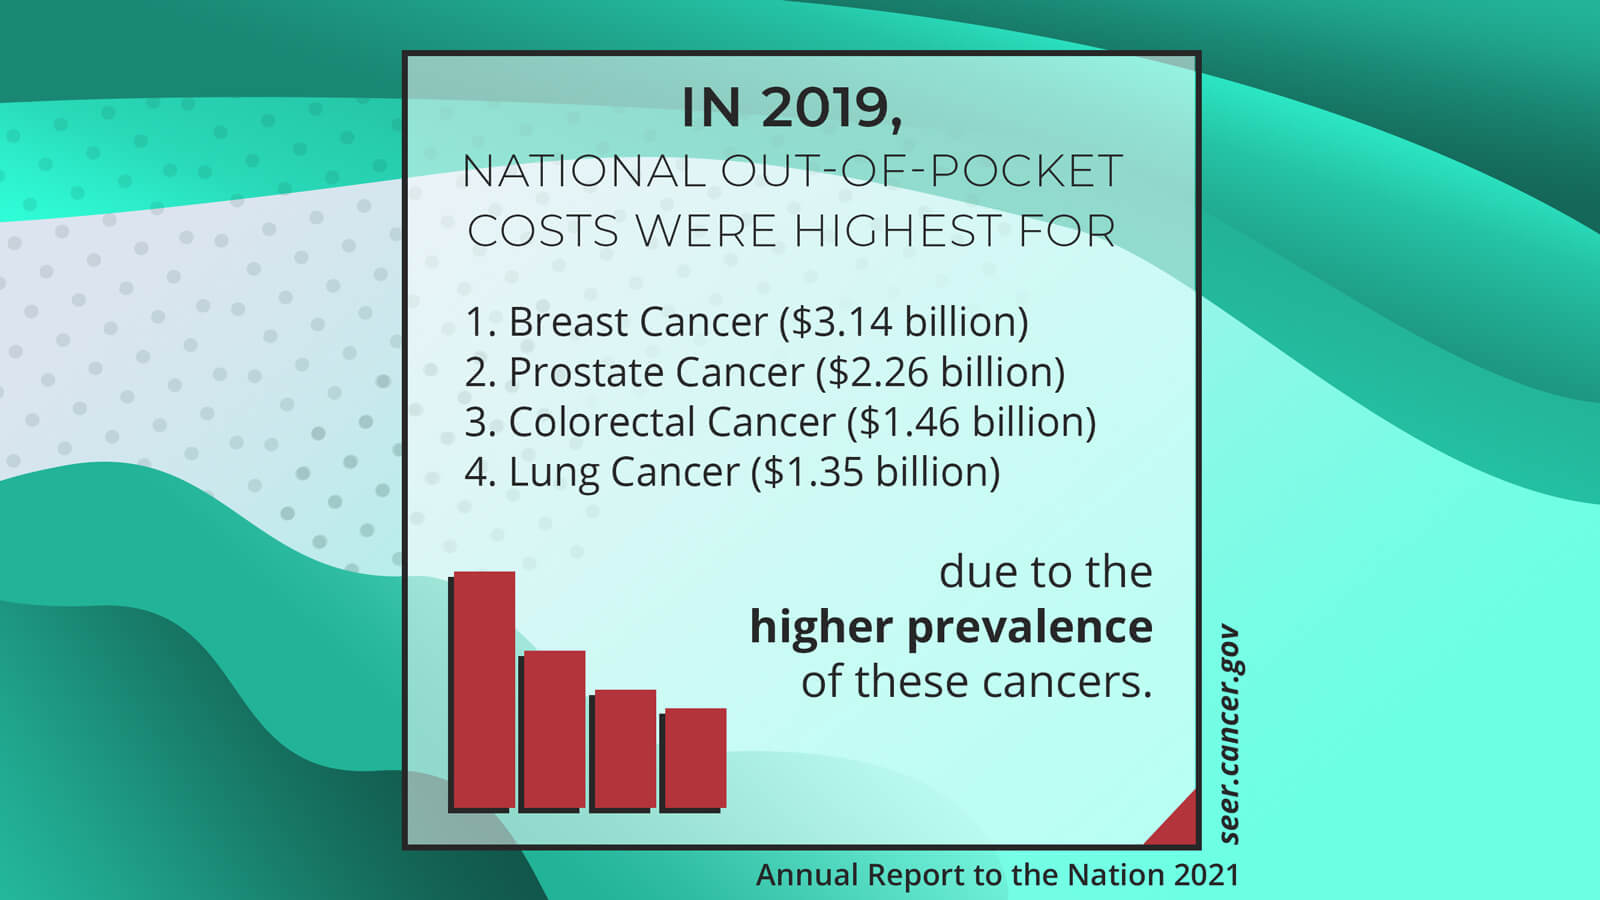 Patient economic burden of cancer care more than $21 billion in the US in 2019.